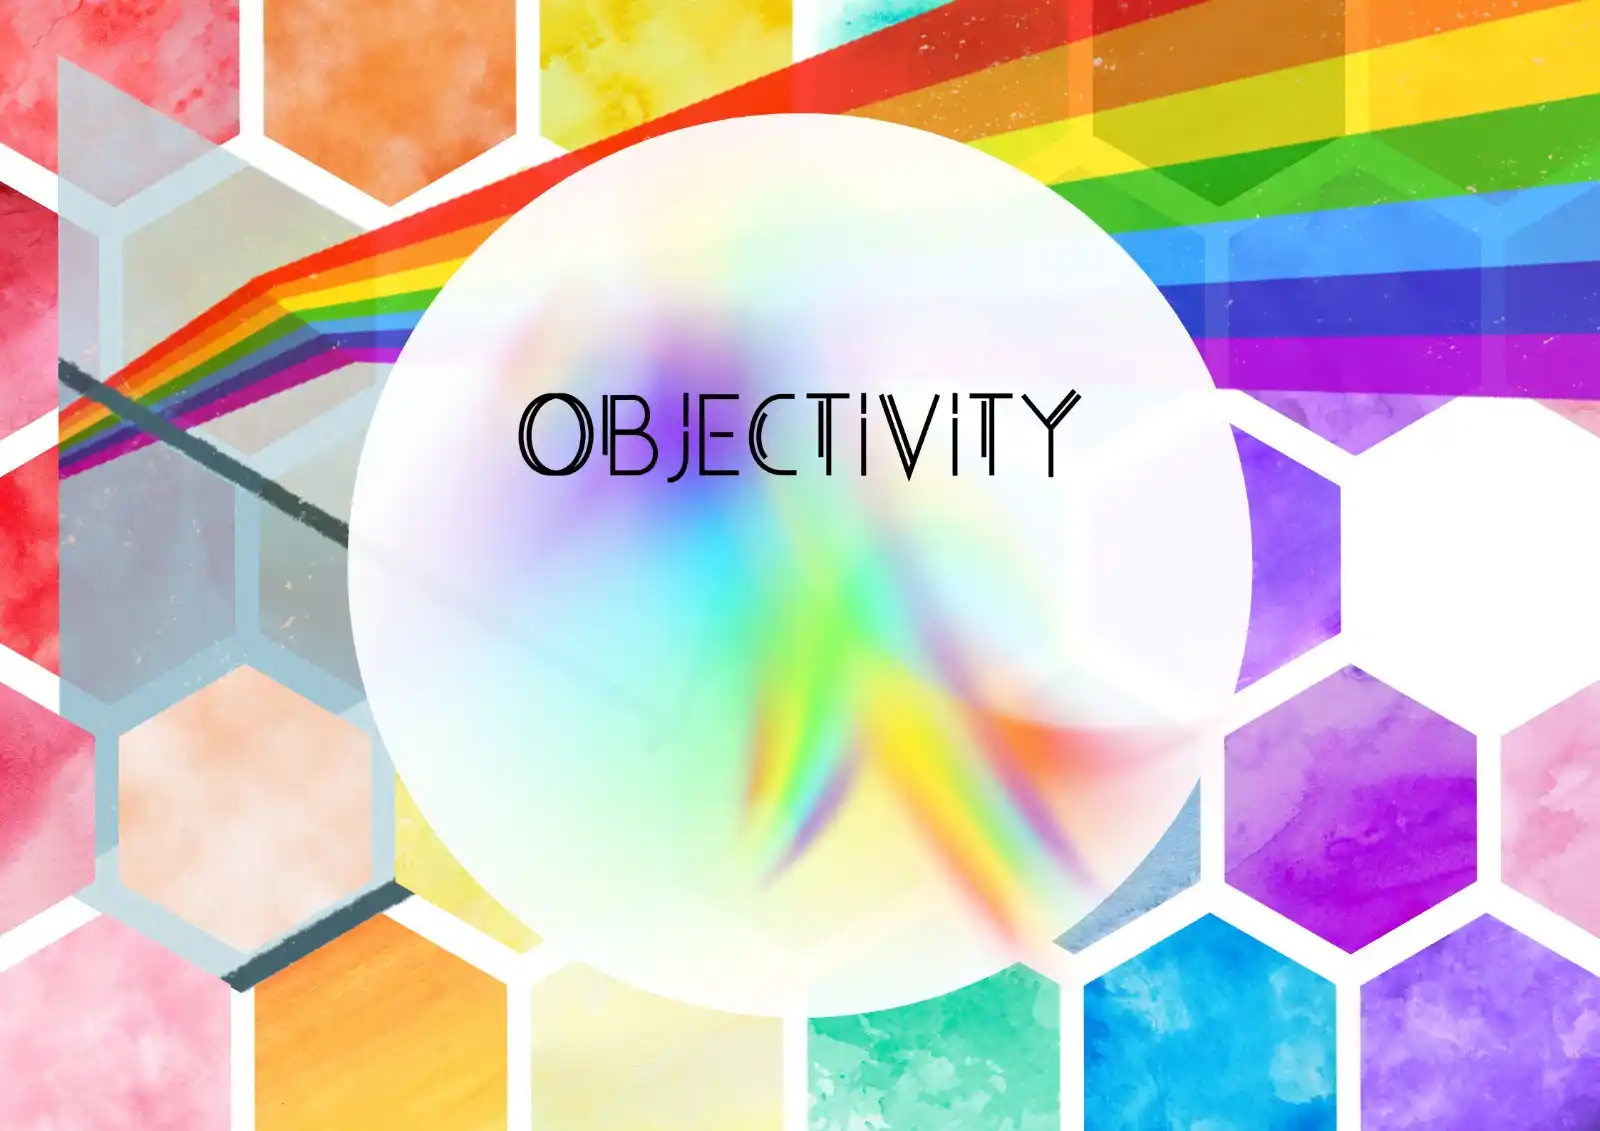 A prism perfectly embodies objectivity in TOK by illustrating how, through clarity and unbiased analysis, we can reveal and appreciate the full spectrum of perspectives hidden within a single beam of truth.